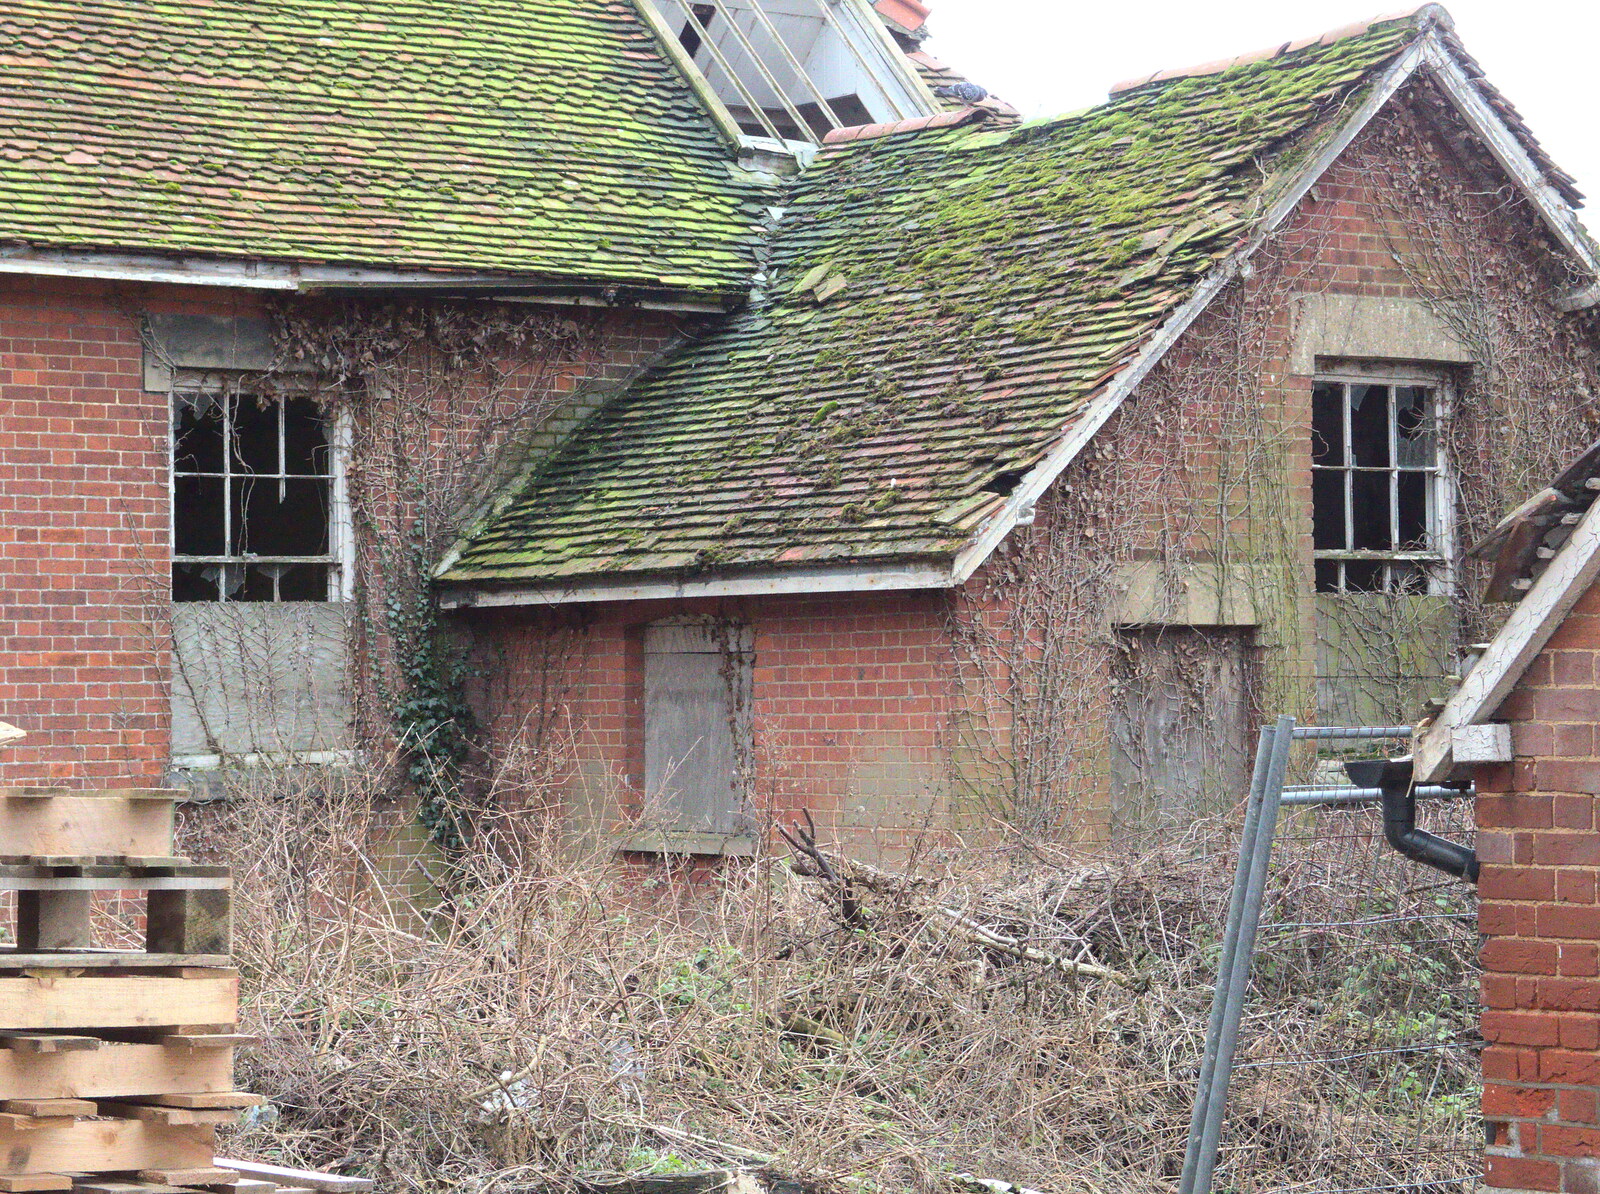 Broken roofs from Closing Down: A Late January Miscellany, Diss, Norfolk - 31st January 2015